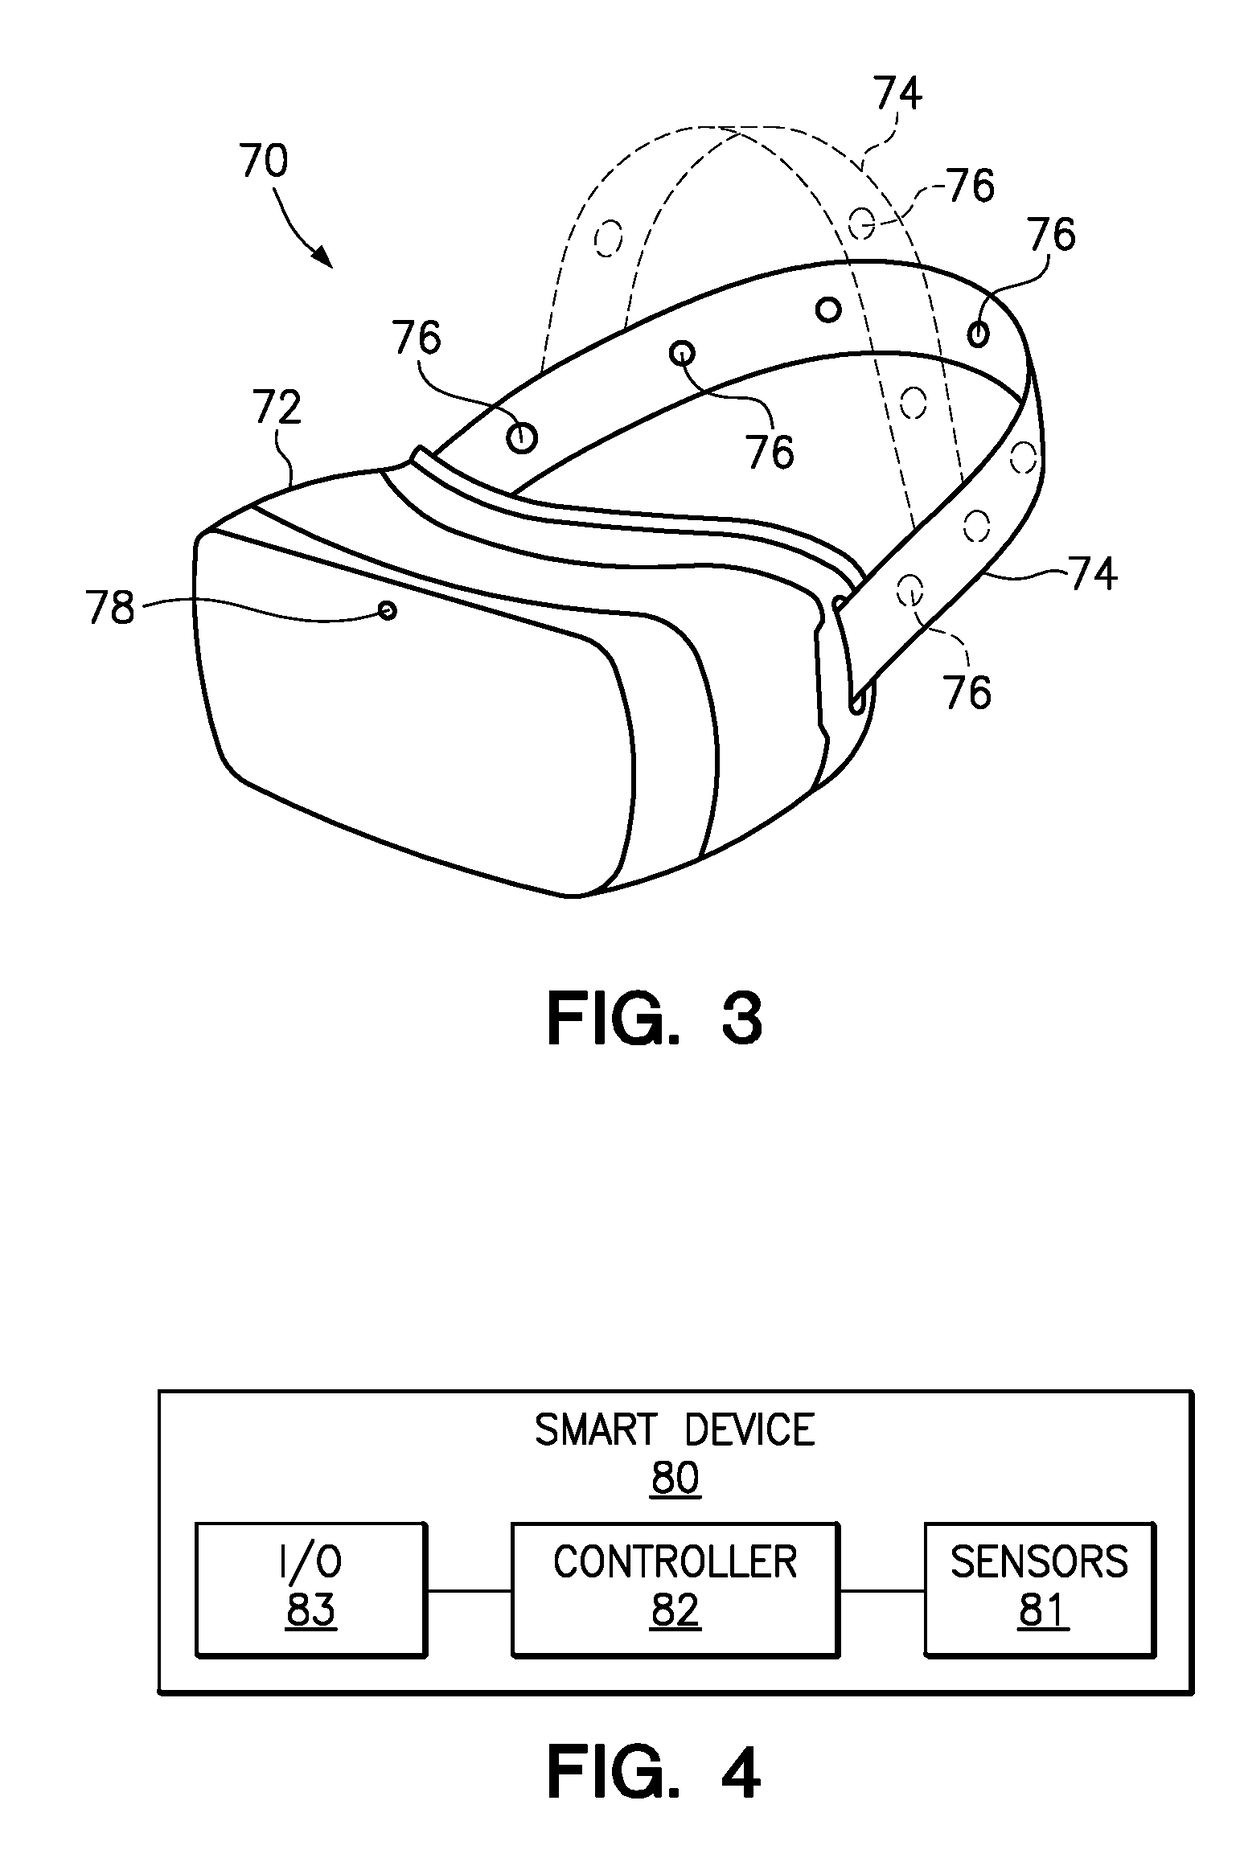 Control of a video display headset using input from sensors disposed about the brain of a user